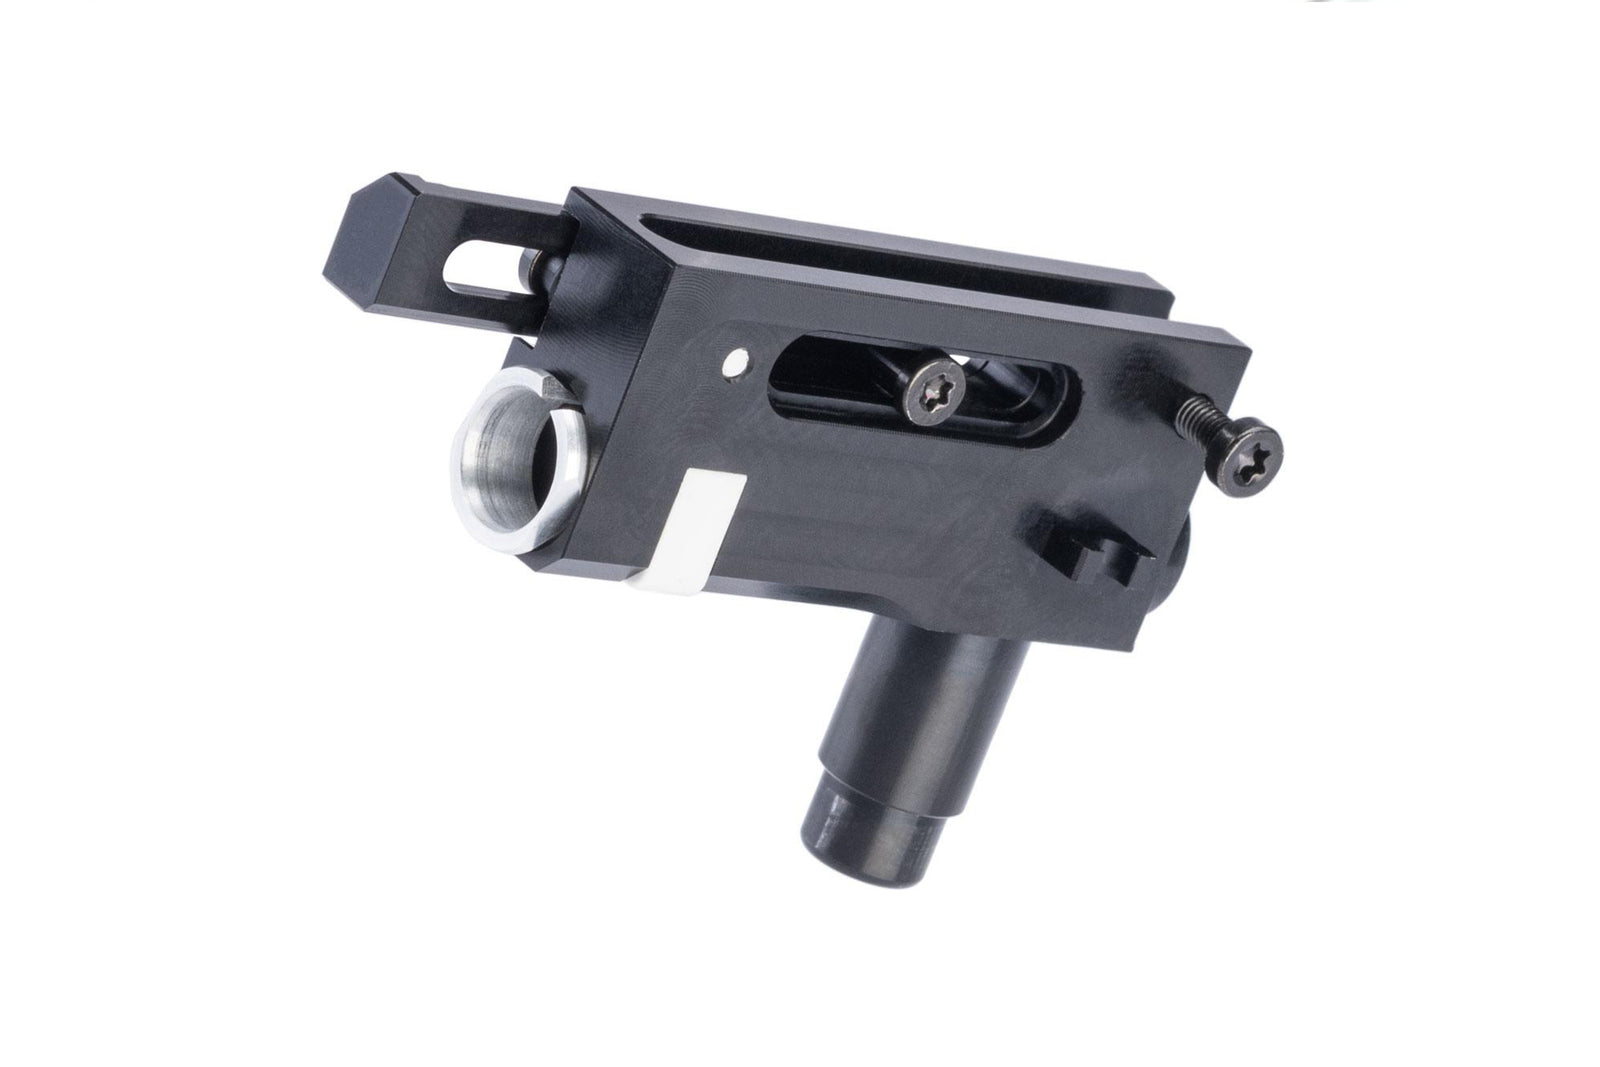 Retro Arms CNC Machined Aluminum Hop-Up Unit for AK Series Airsoft AEGs